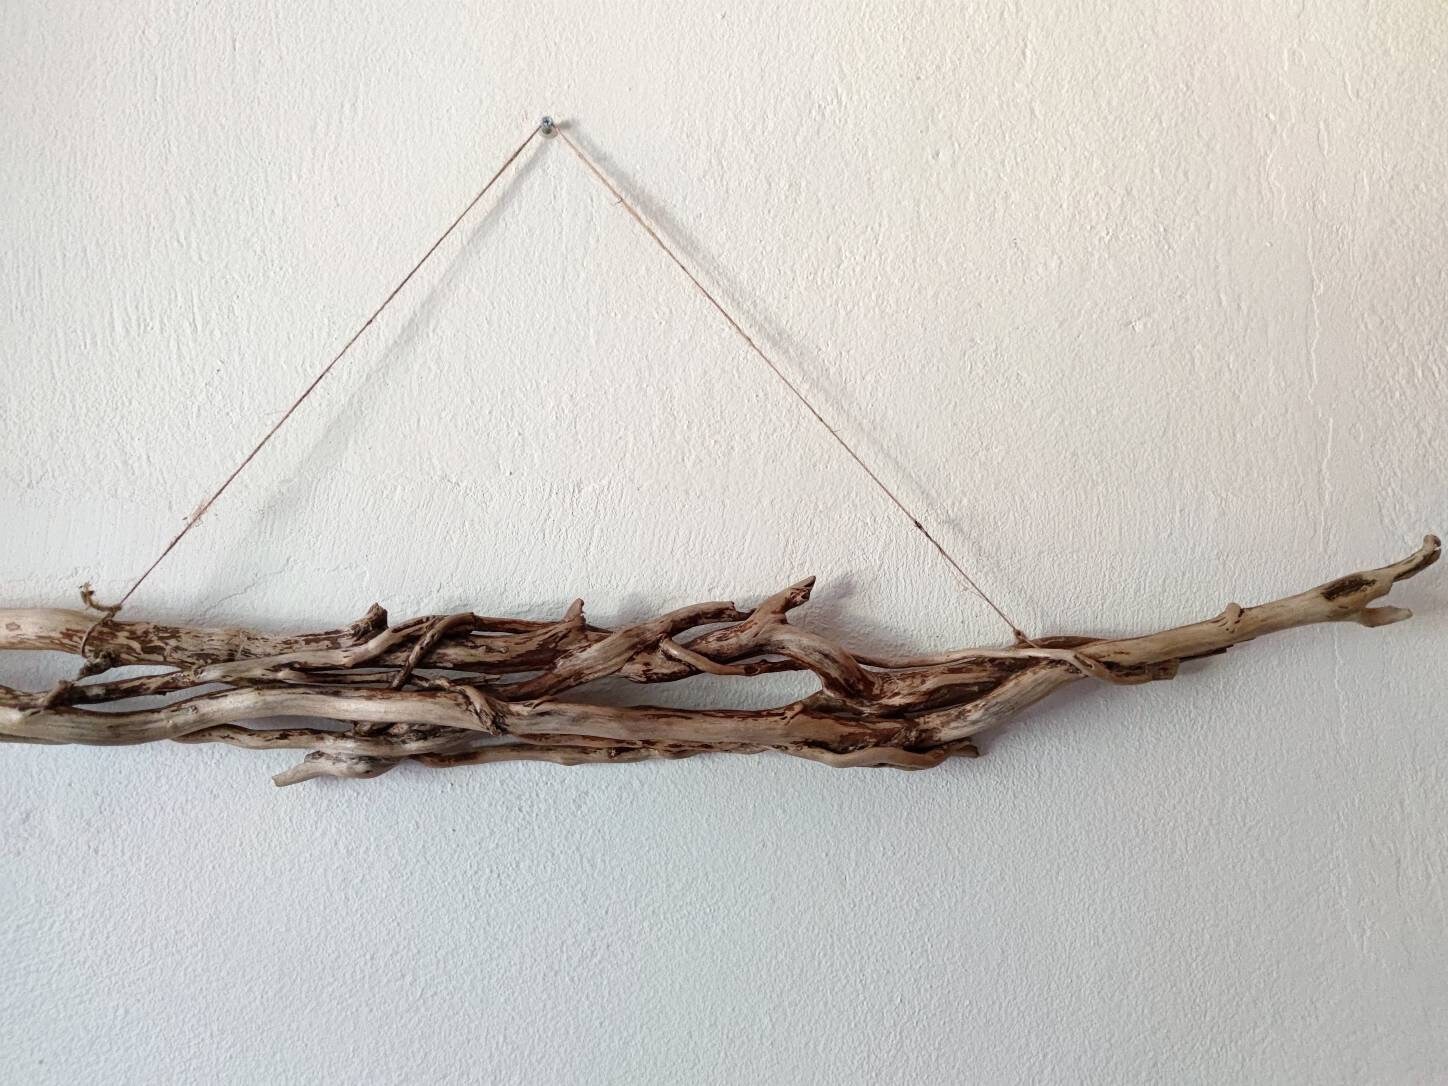 Large 1m Driftwood Branch With Rare Shape for Wall Decoration/ Long Natural  Driftwood Branch From Greece/ Rare Branchy Driftwood for Wall -  Canada